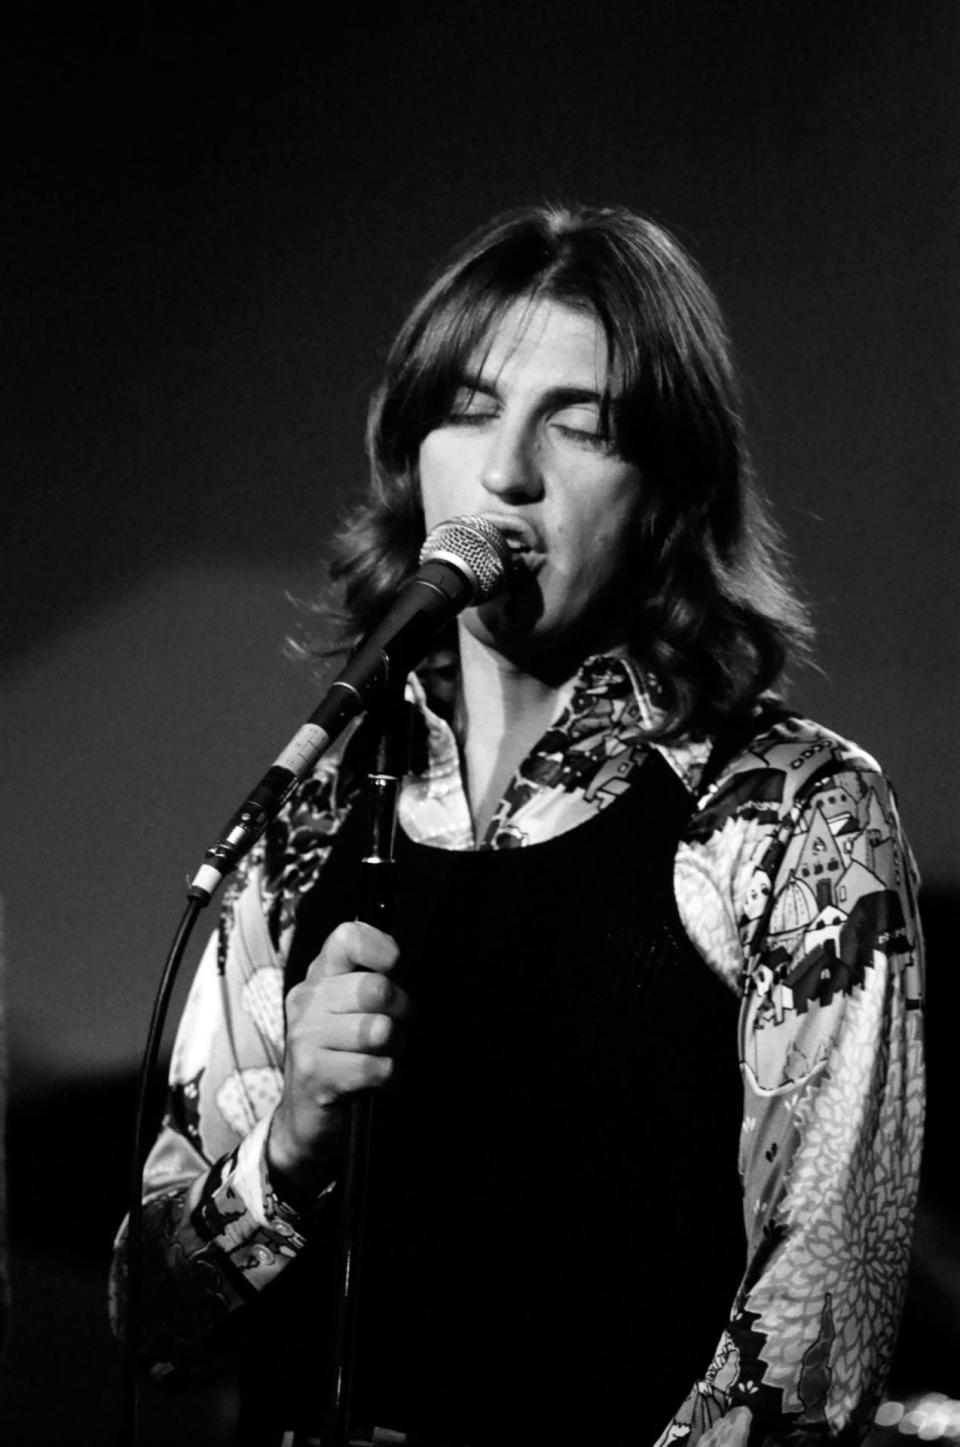 Cory Wells was one of the three lead singers of the band Three Dog Night. He died Oct. 20 due to an infection resulting from a form of blood cancer. He was 74. (Photo by: Fred A. Sabine/NBCU Photo Bank)